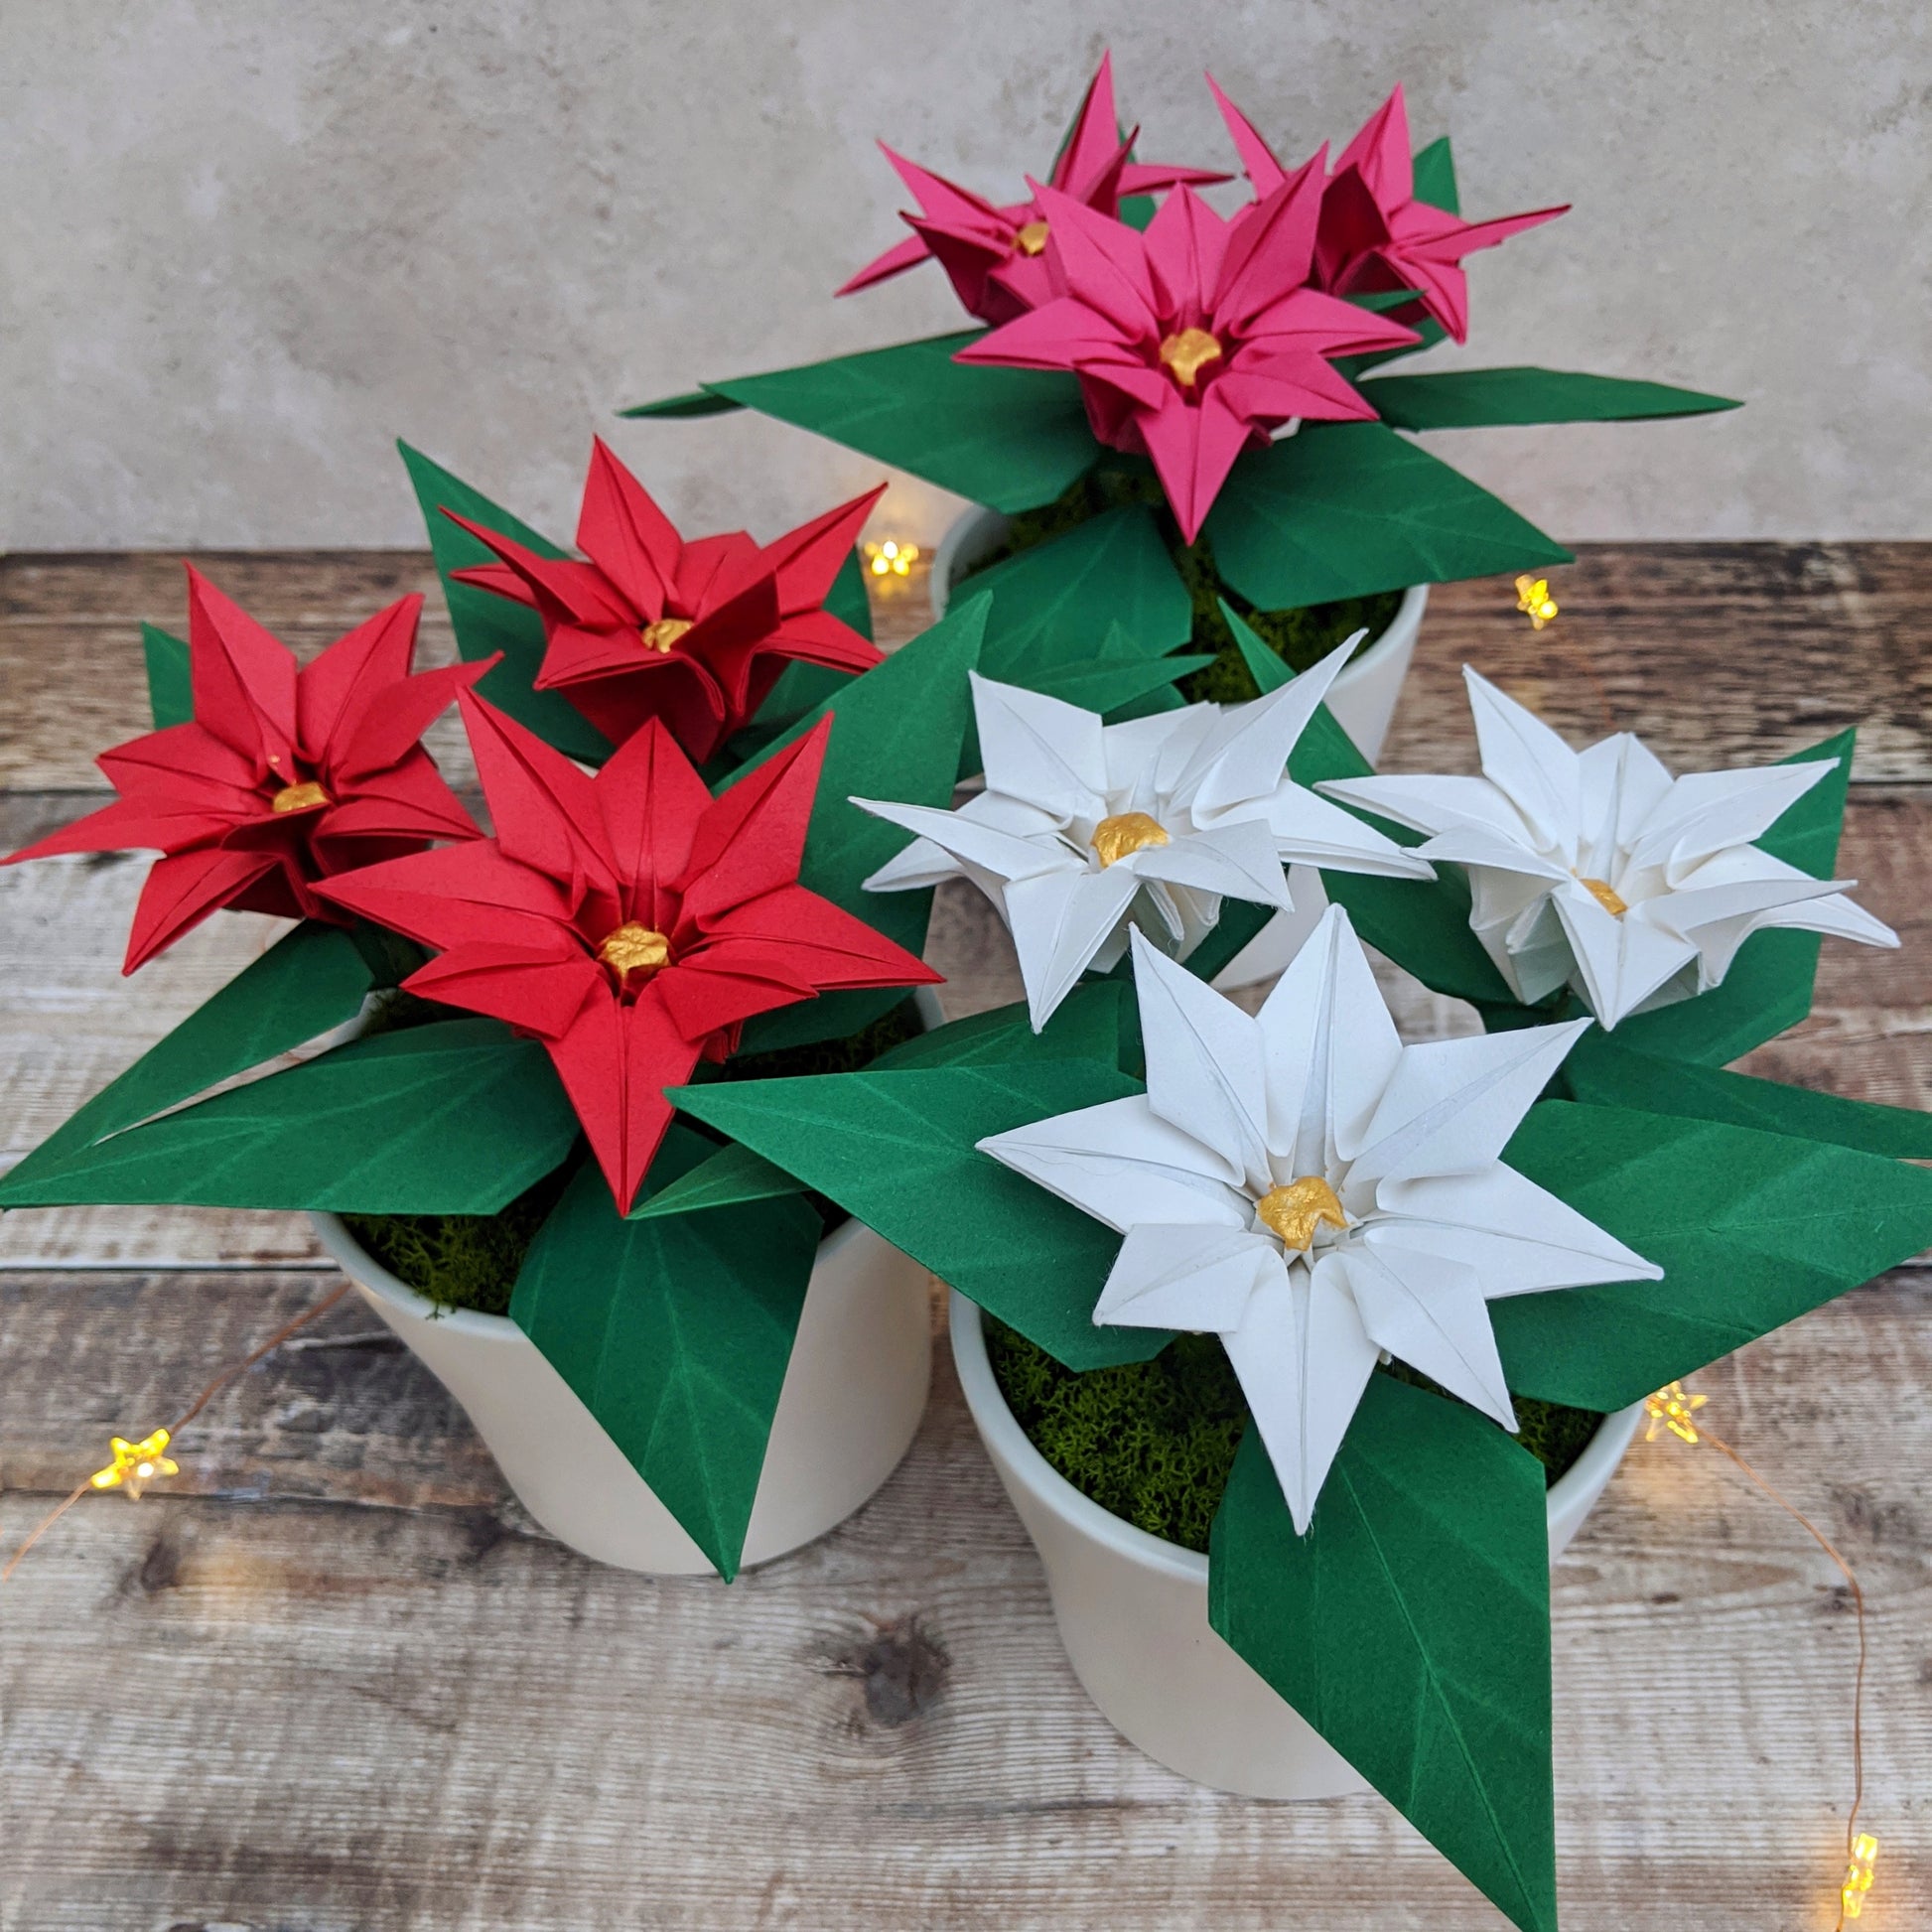 origami poinsettia potted plants with red, white and pink flowers